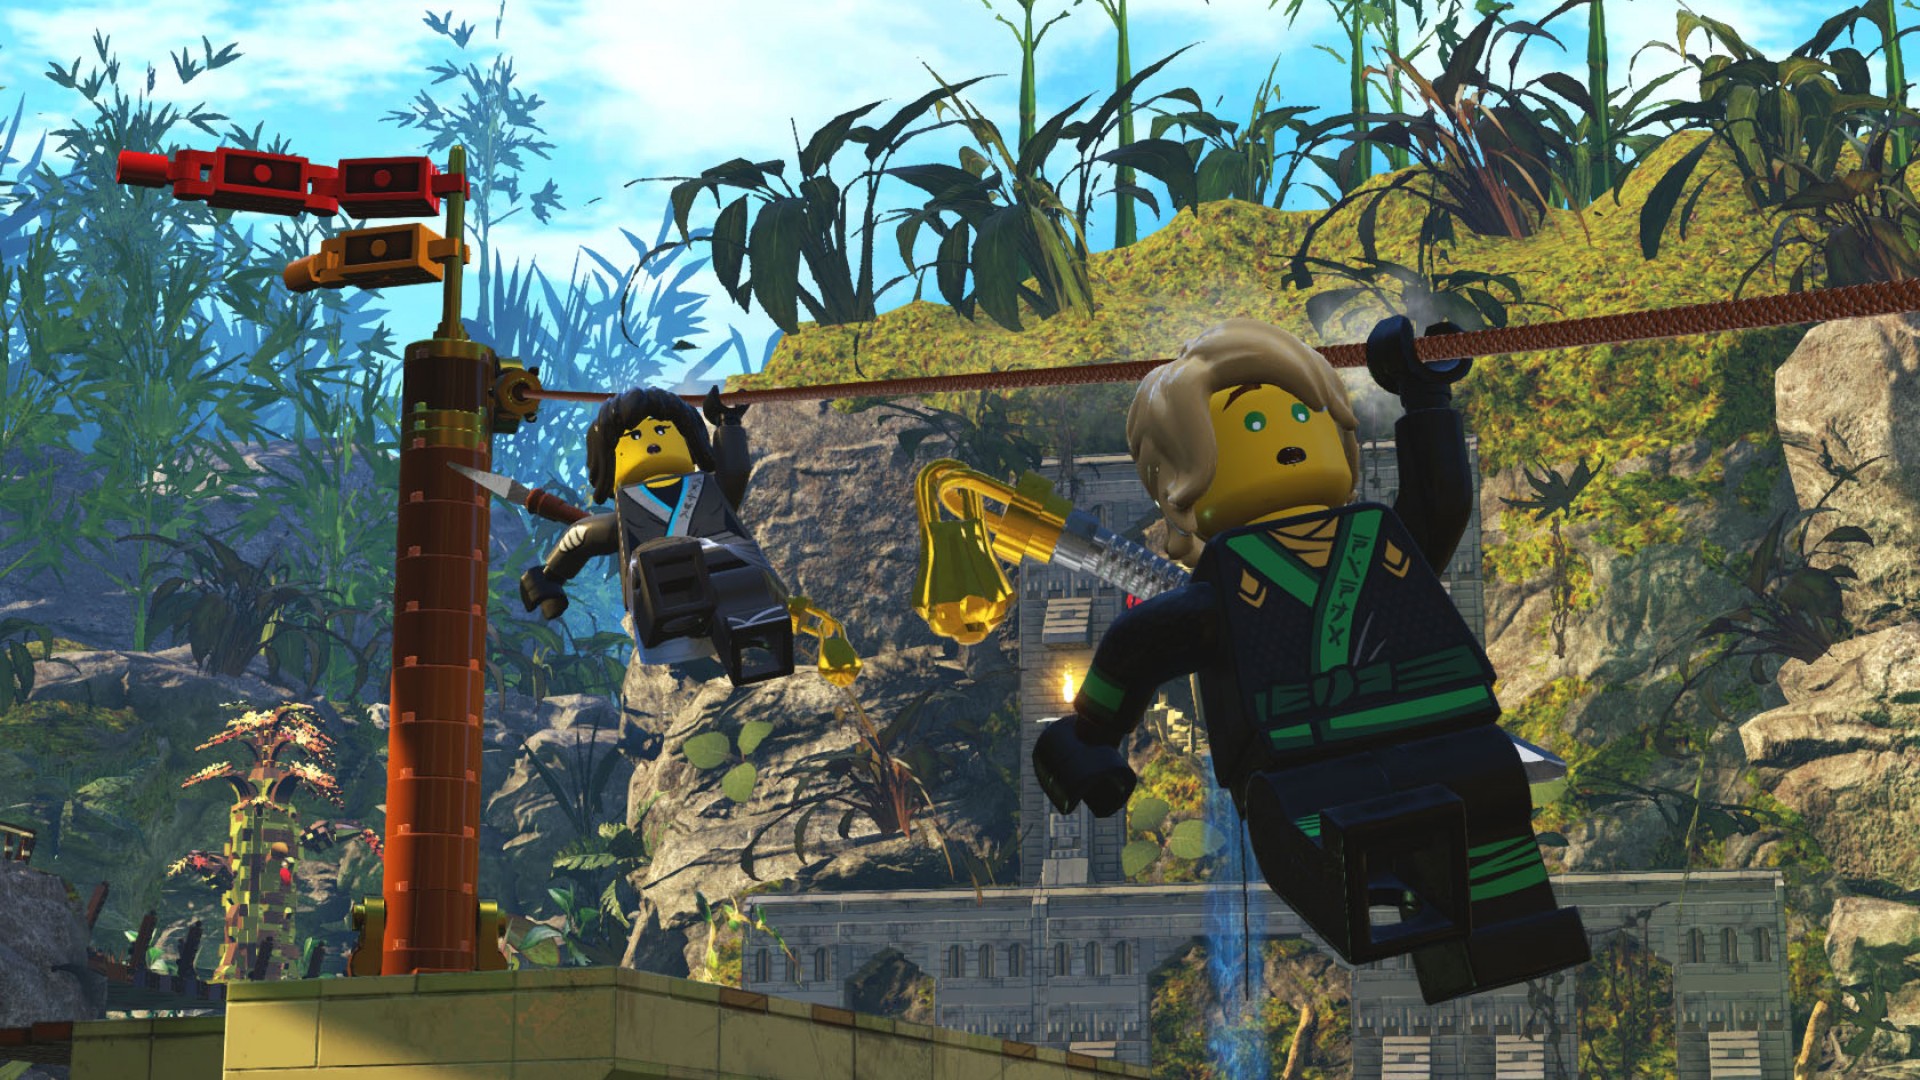 Ouille! 44+ Raisons pour Lego Ninjago Games Xbox 360! Games for boys, girls, kids and adults 